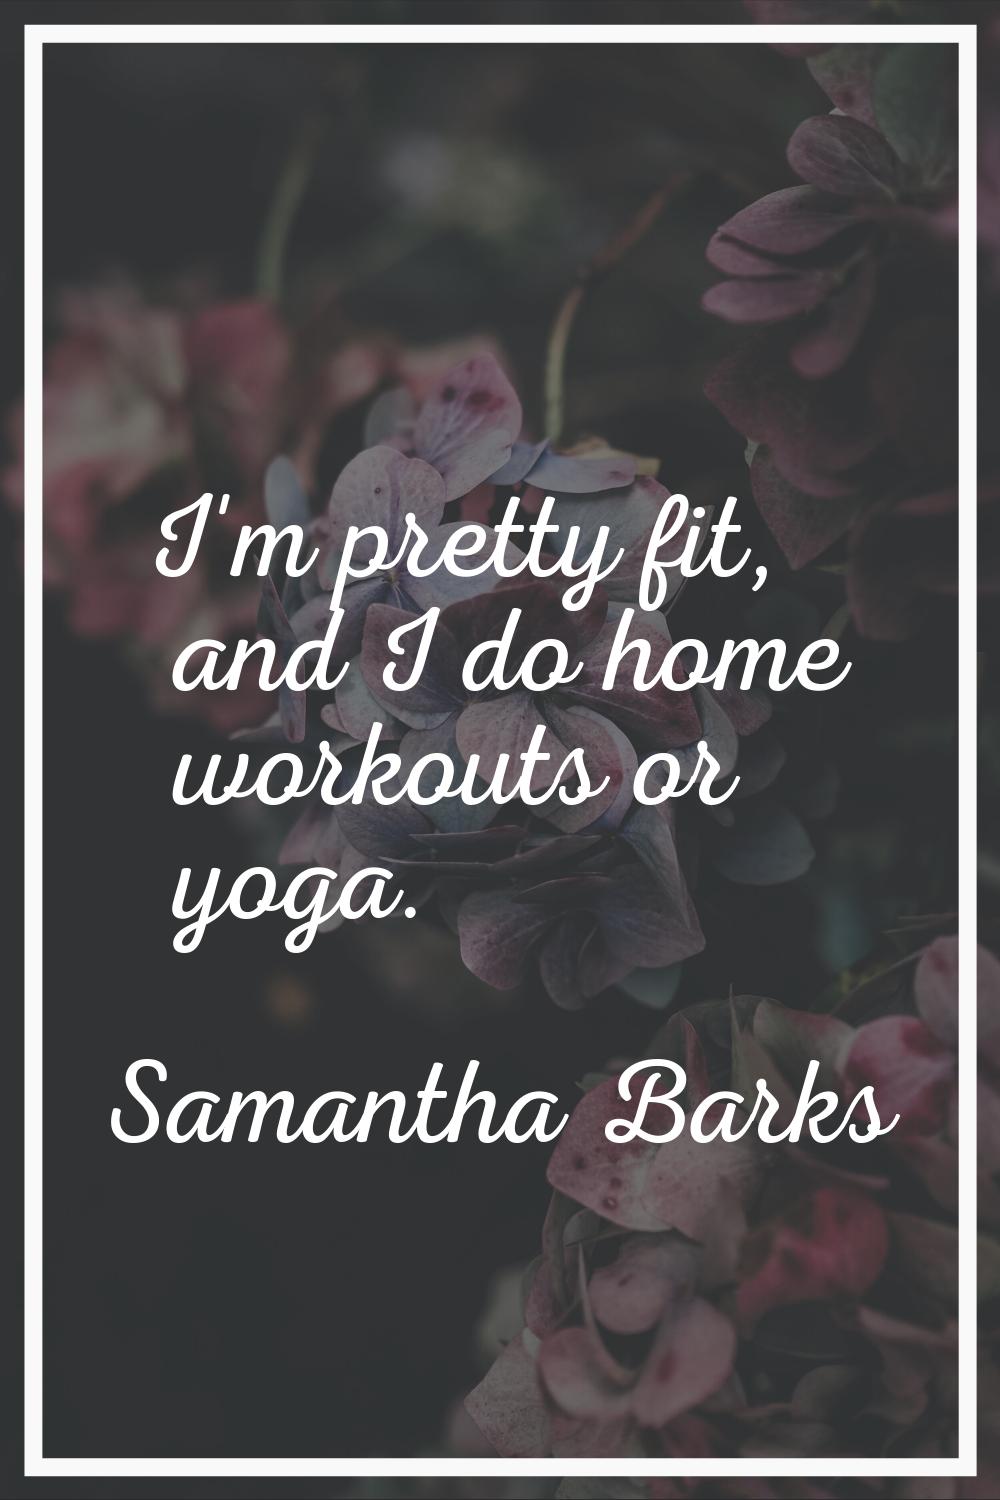 I'm pretty fit, and I do home workouts or yoga.